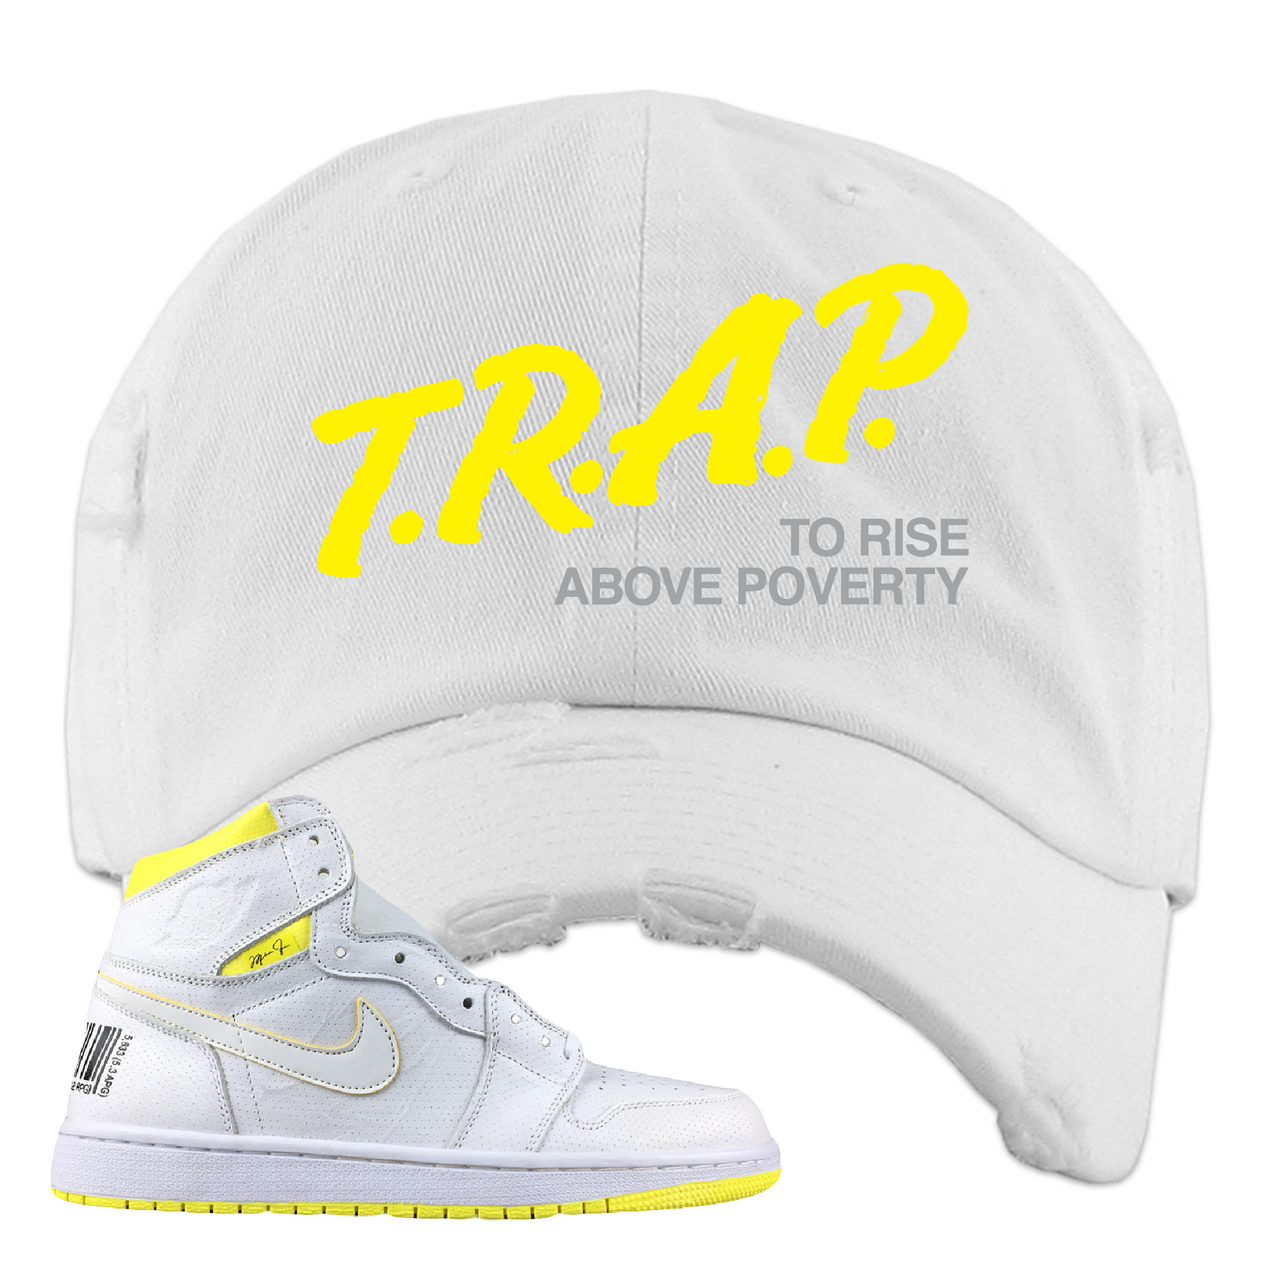 Jordan 1 First Class Flight Trap To Rise Above Poverty Sneaker Matching White Distressed Dad Hat